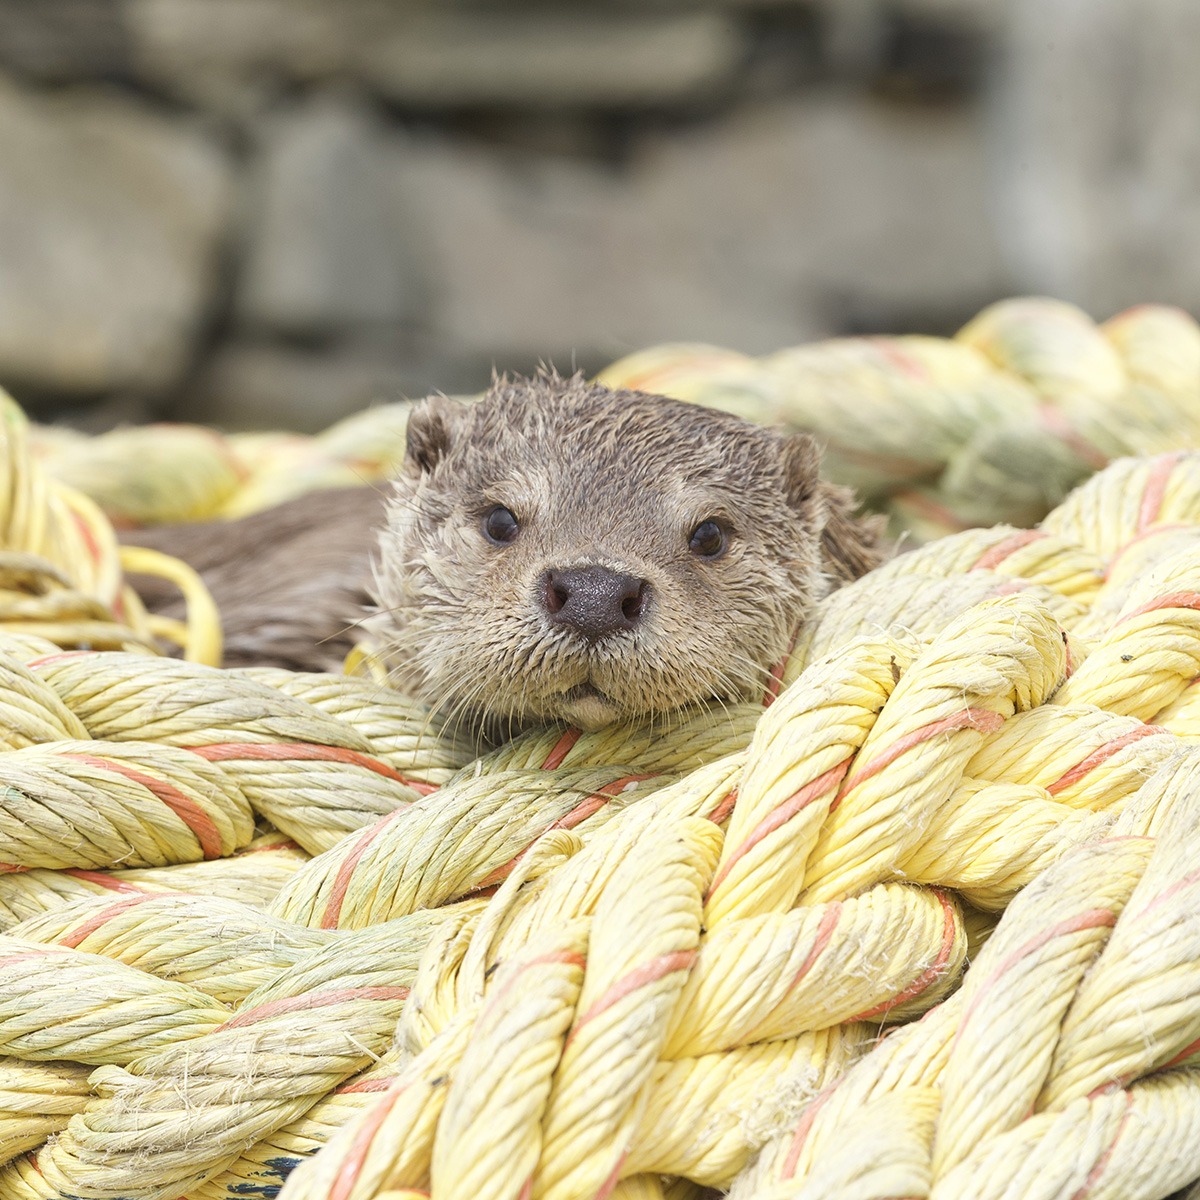 A small otter is hiding in a pile of ropes.